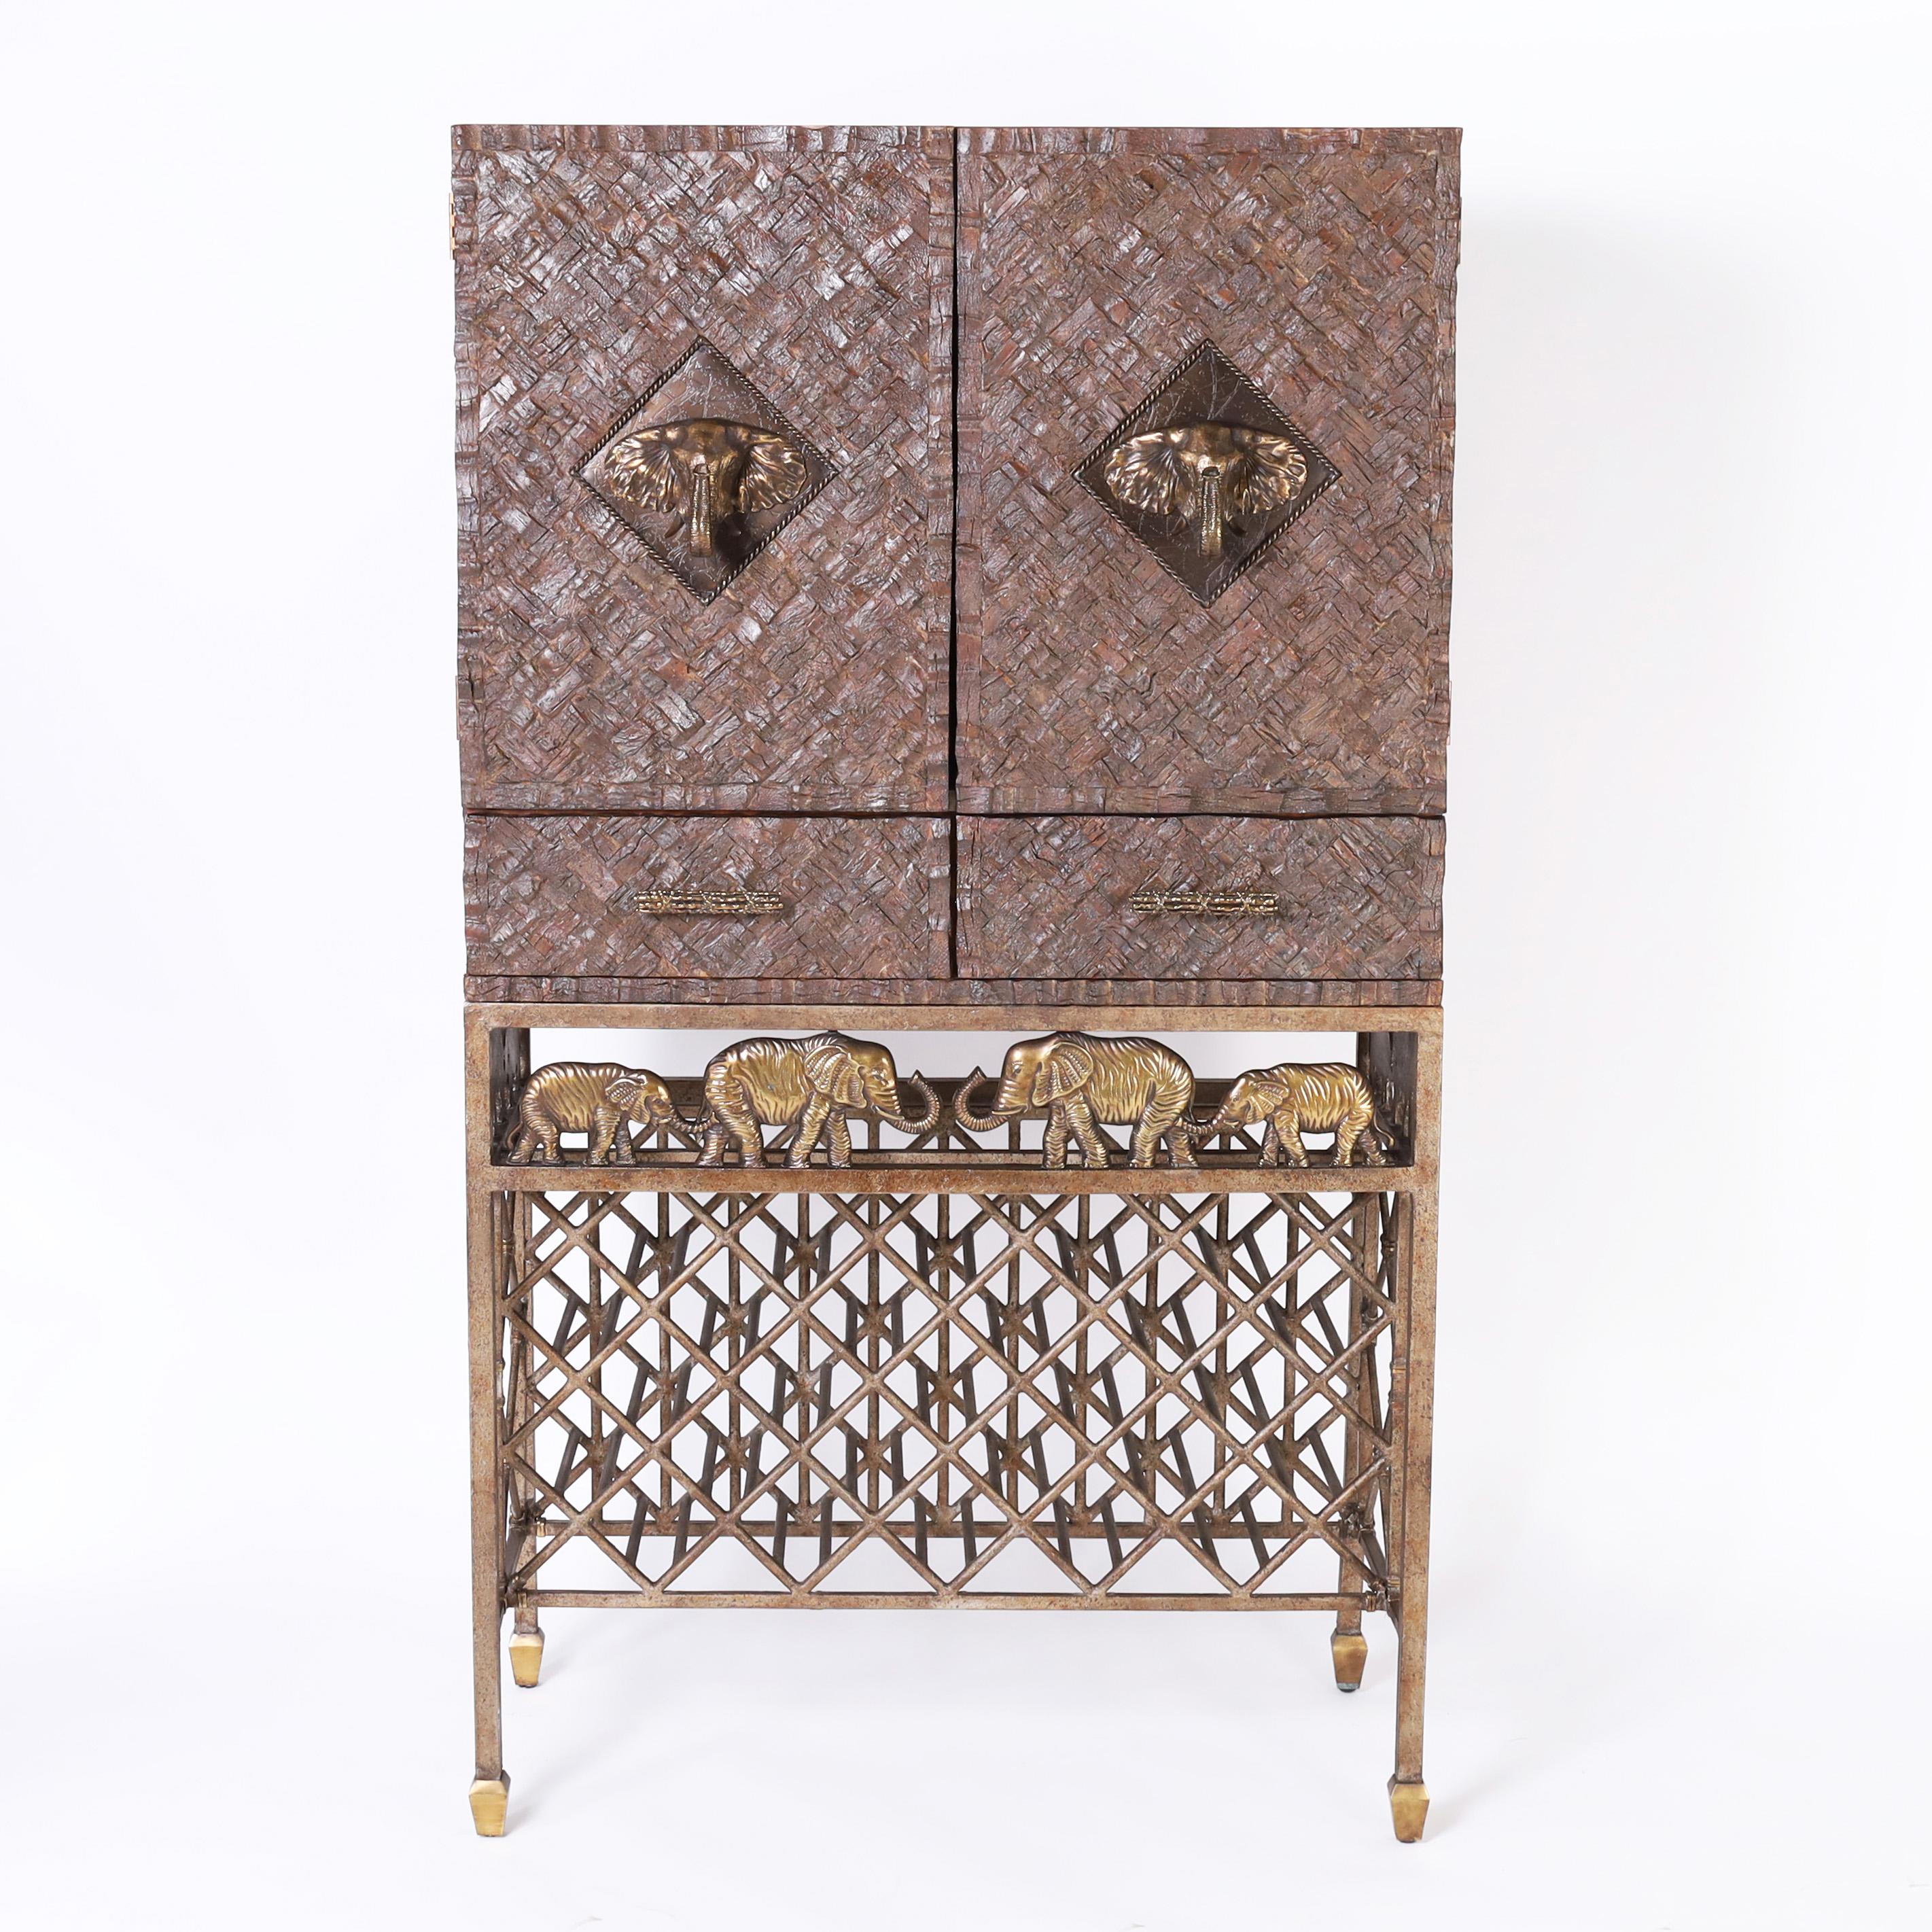 Impressive mid century bar cabinet featuring an upper case crafted in coconut shell with two doors having bronze elephant head handles and an illuminated interior lined in mahogany with a travertine surface over two drawers on an iron base with